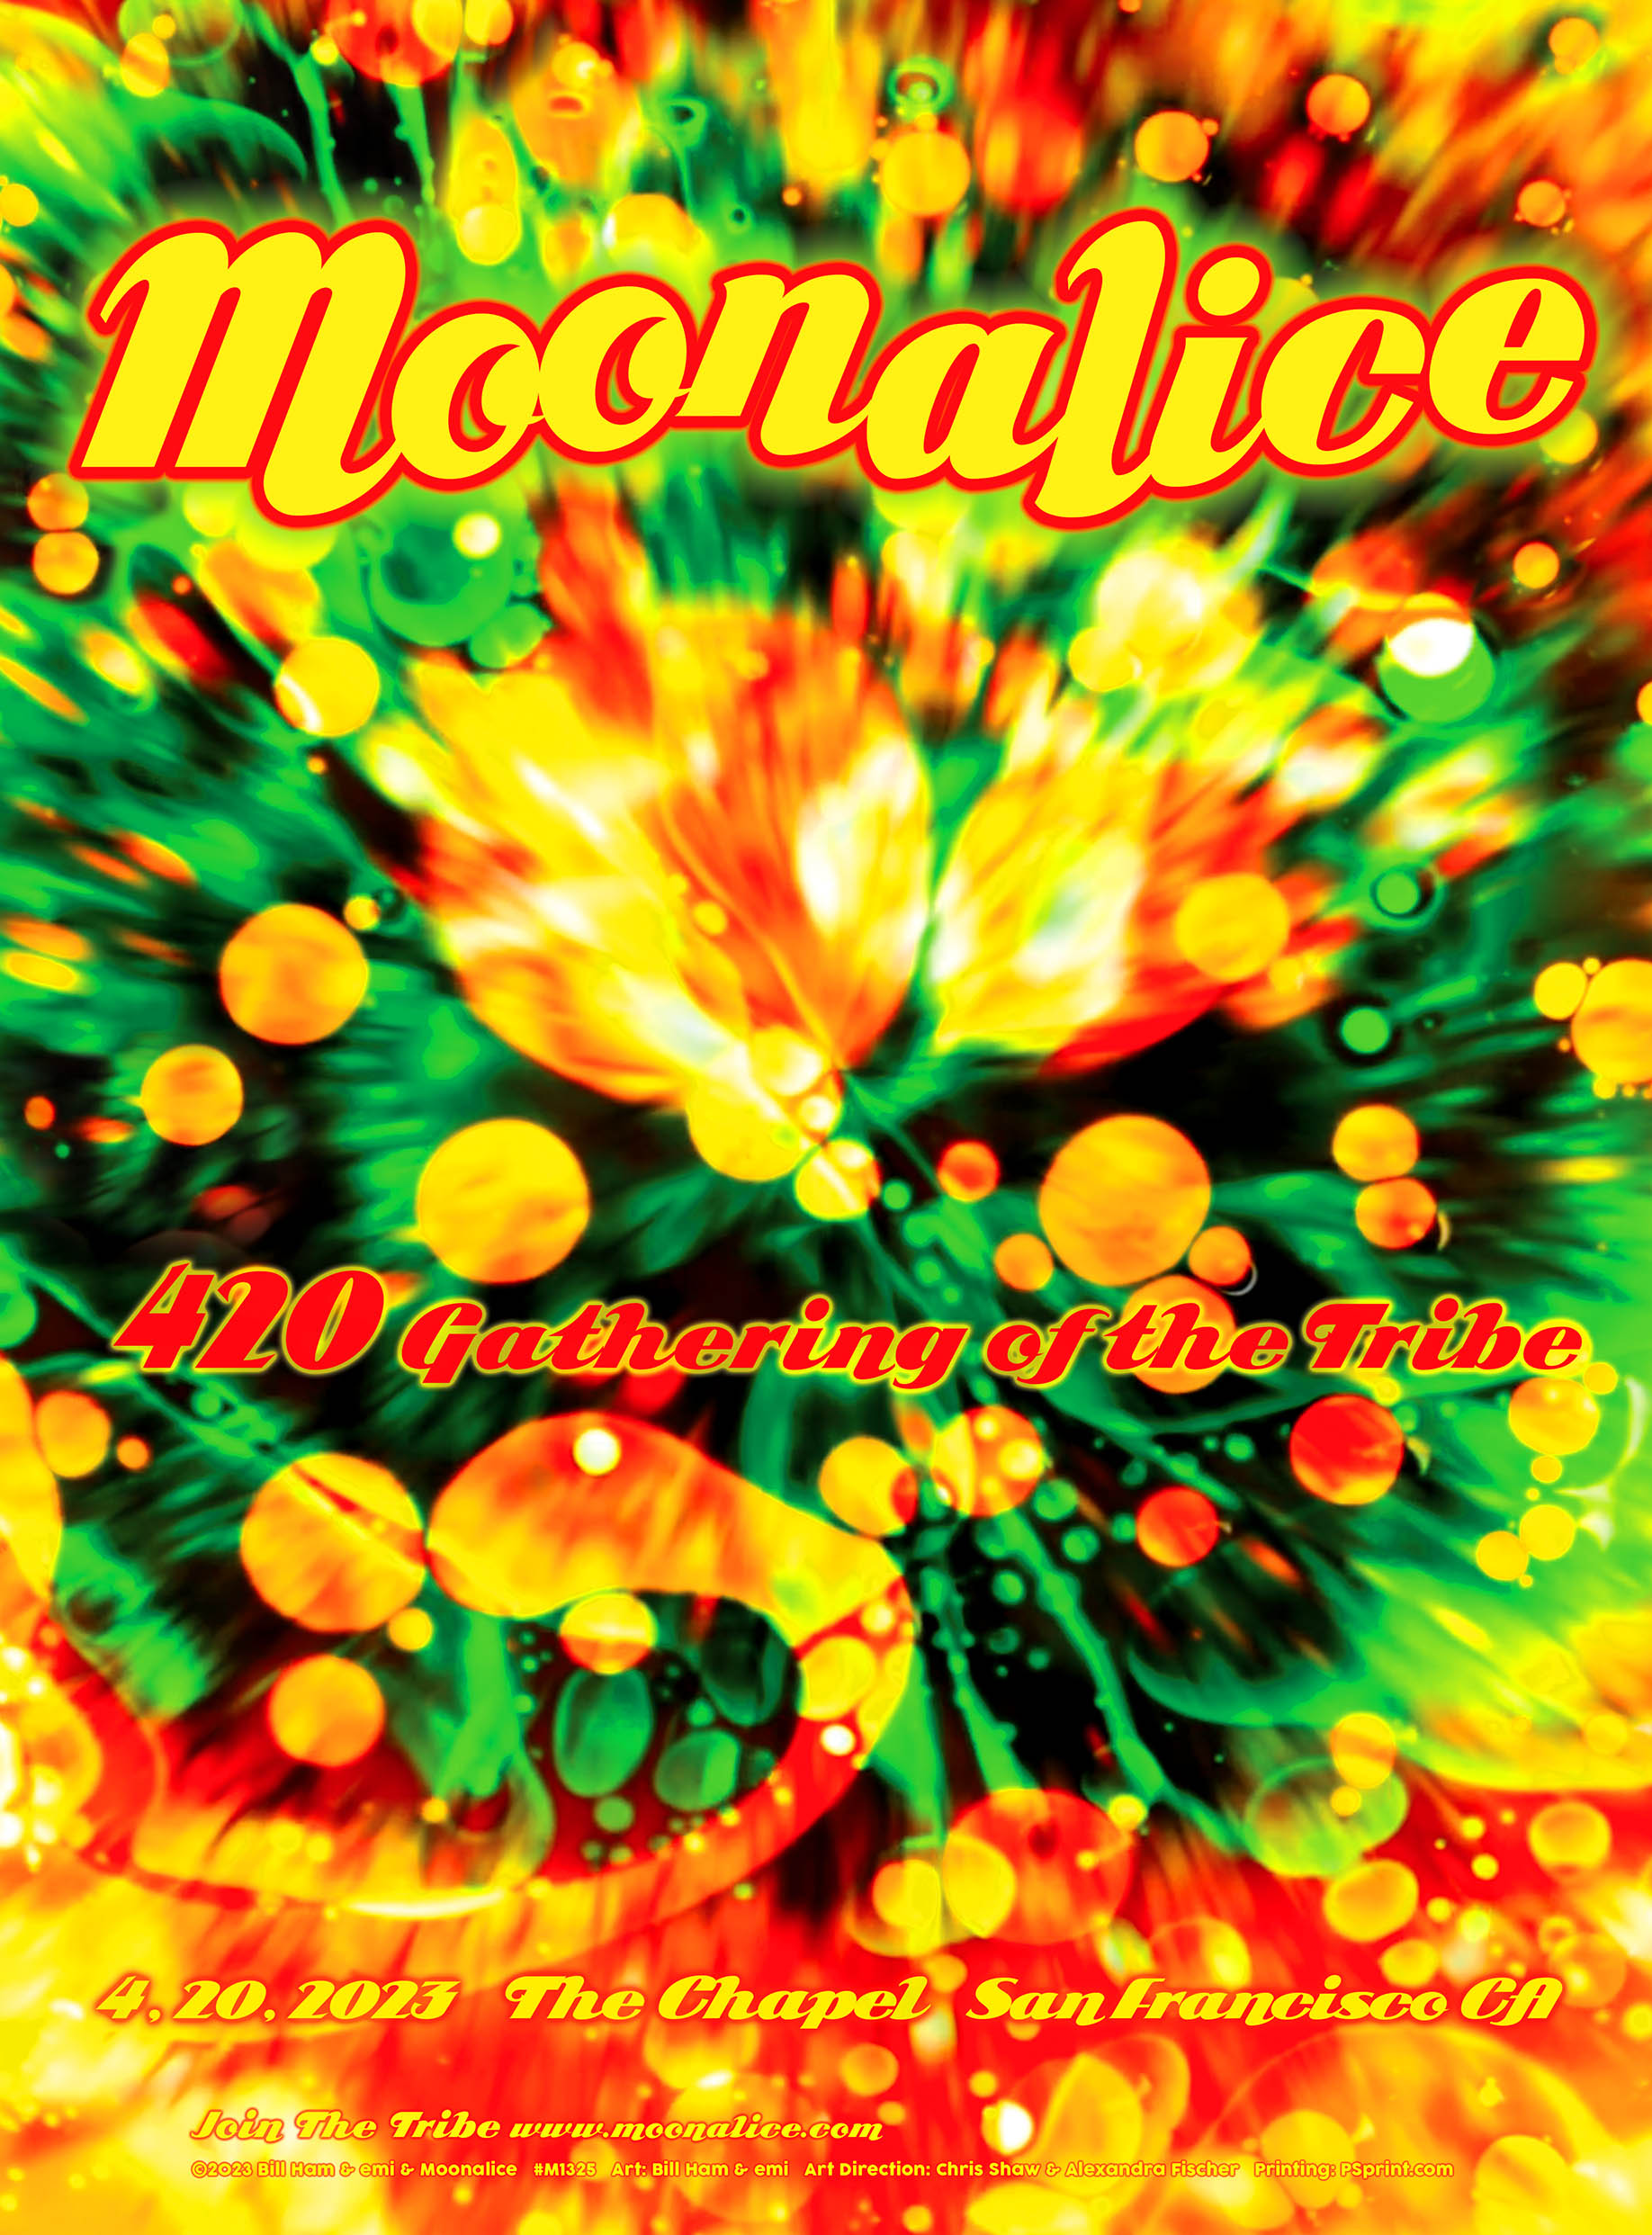 2023 Moonalice 420 Gathering of the Tribe poster, 12.75″ x 17.25″ limited edition offset lithograph printed, Light Painting by Bill Ham, photo and design by emi